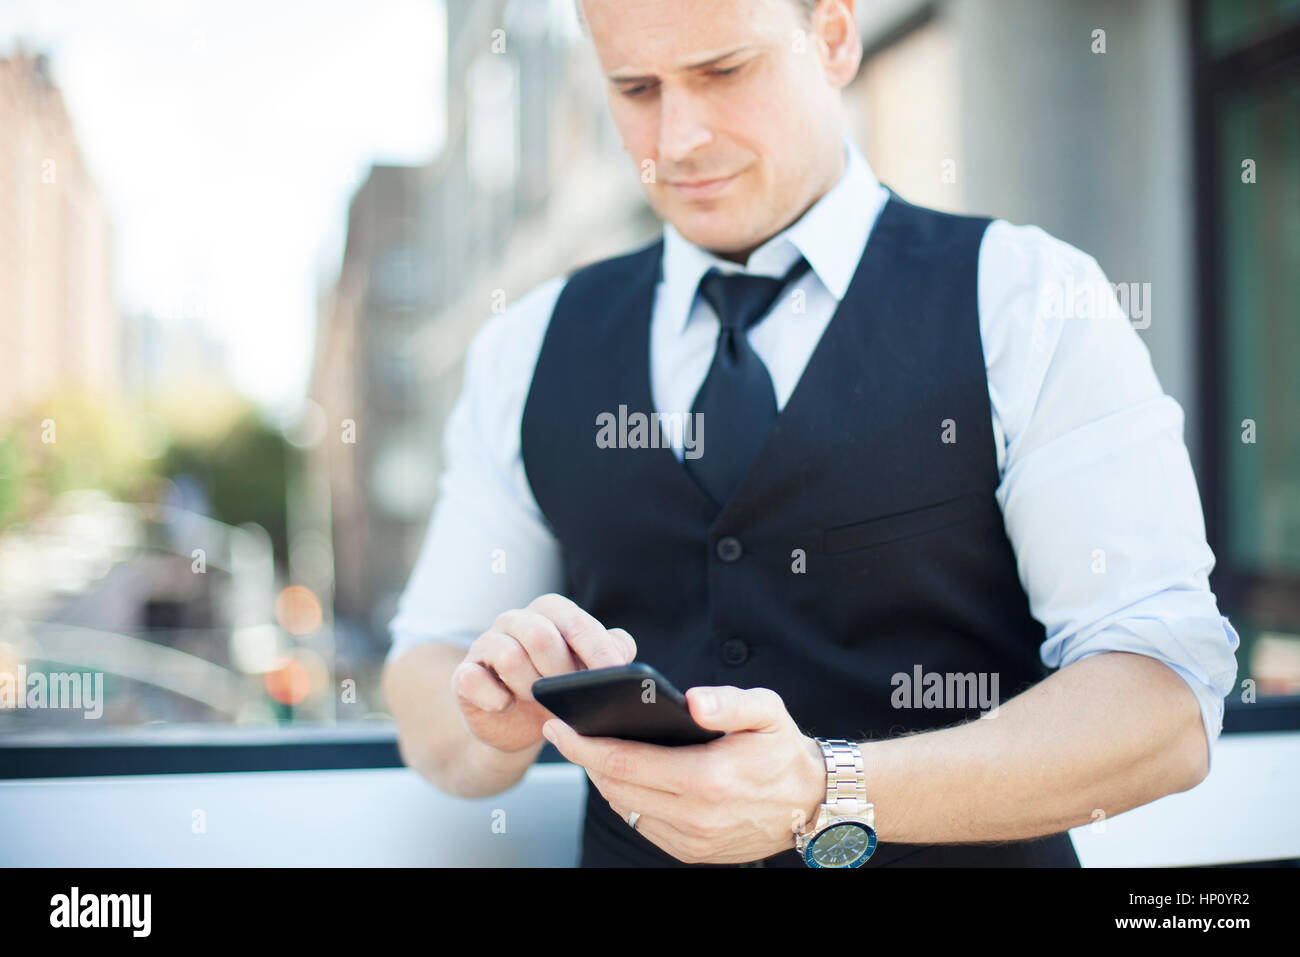 Businessman text messaging with smartphone Stock Photo